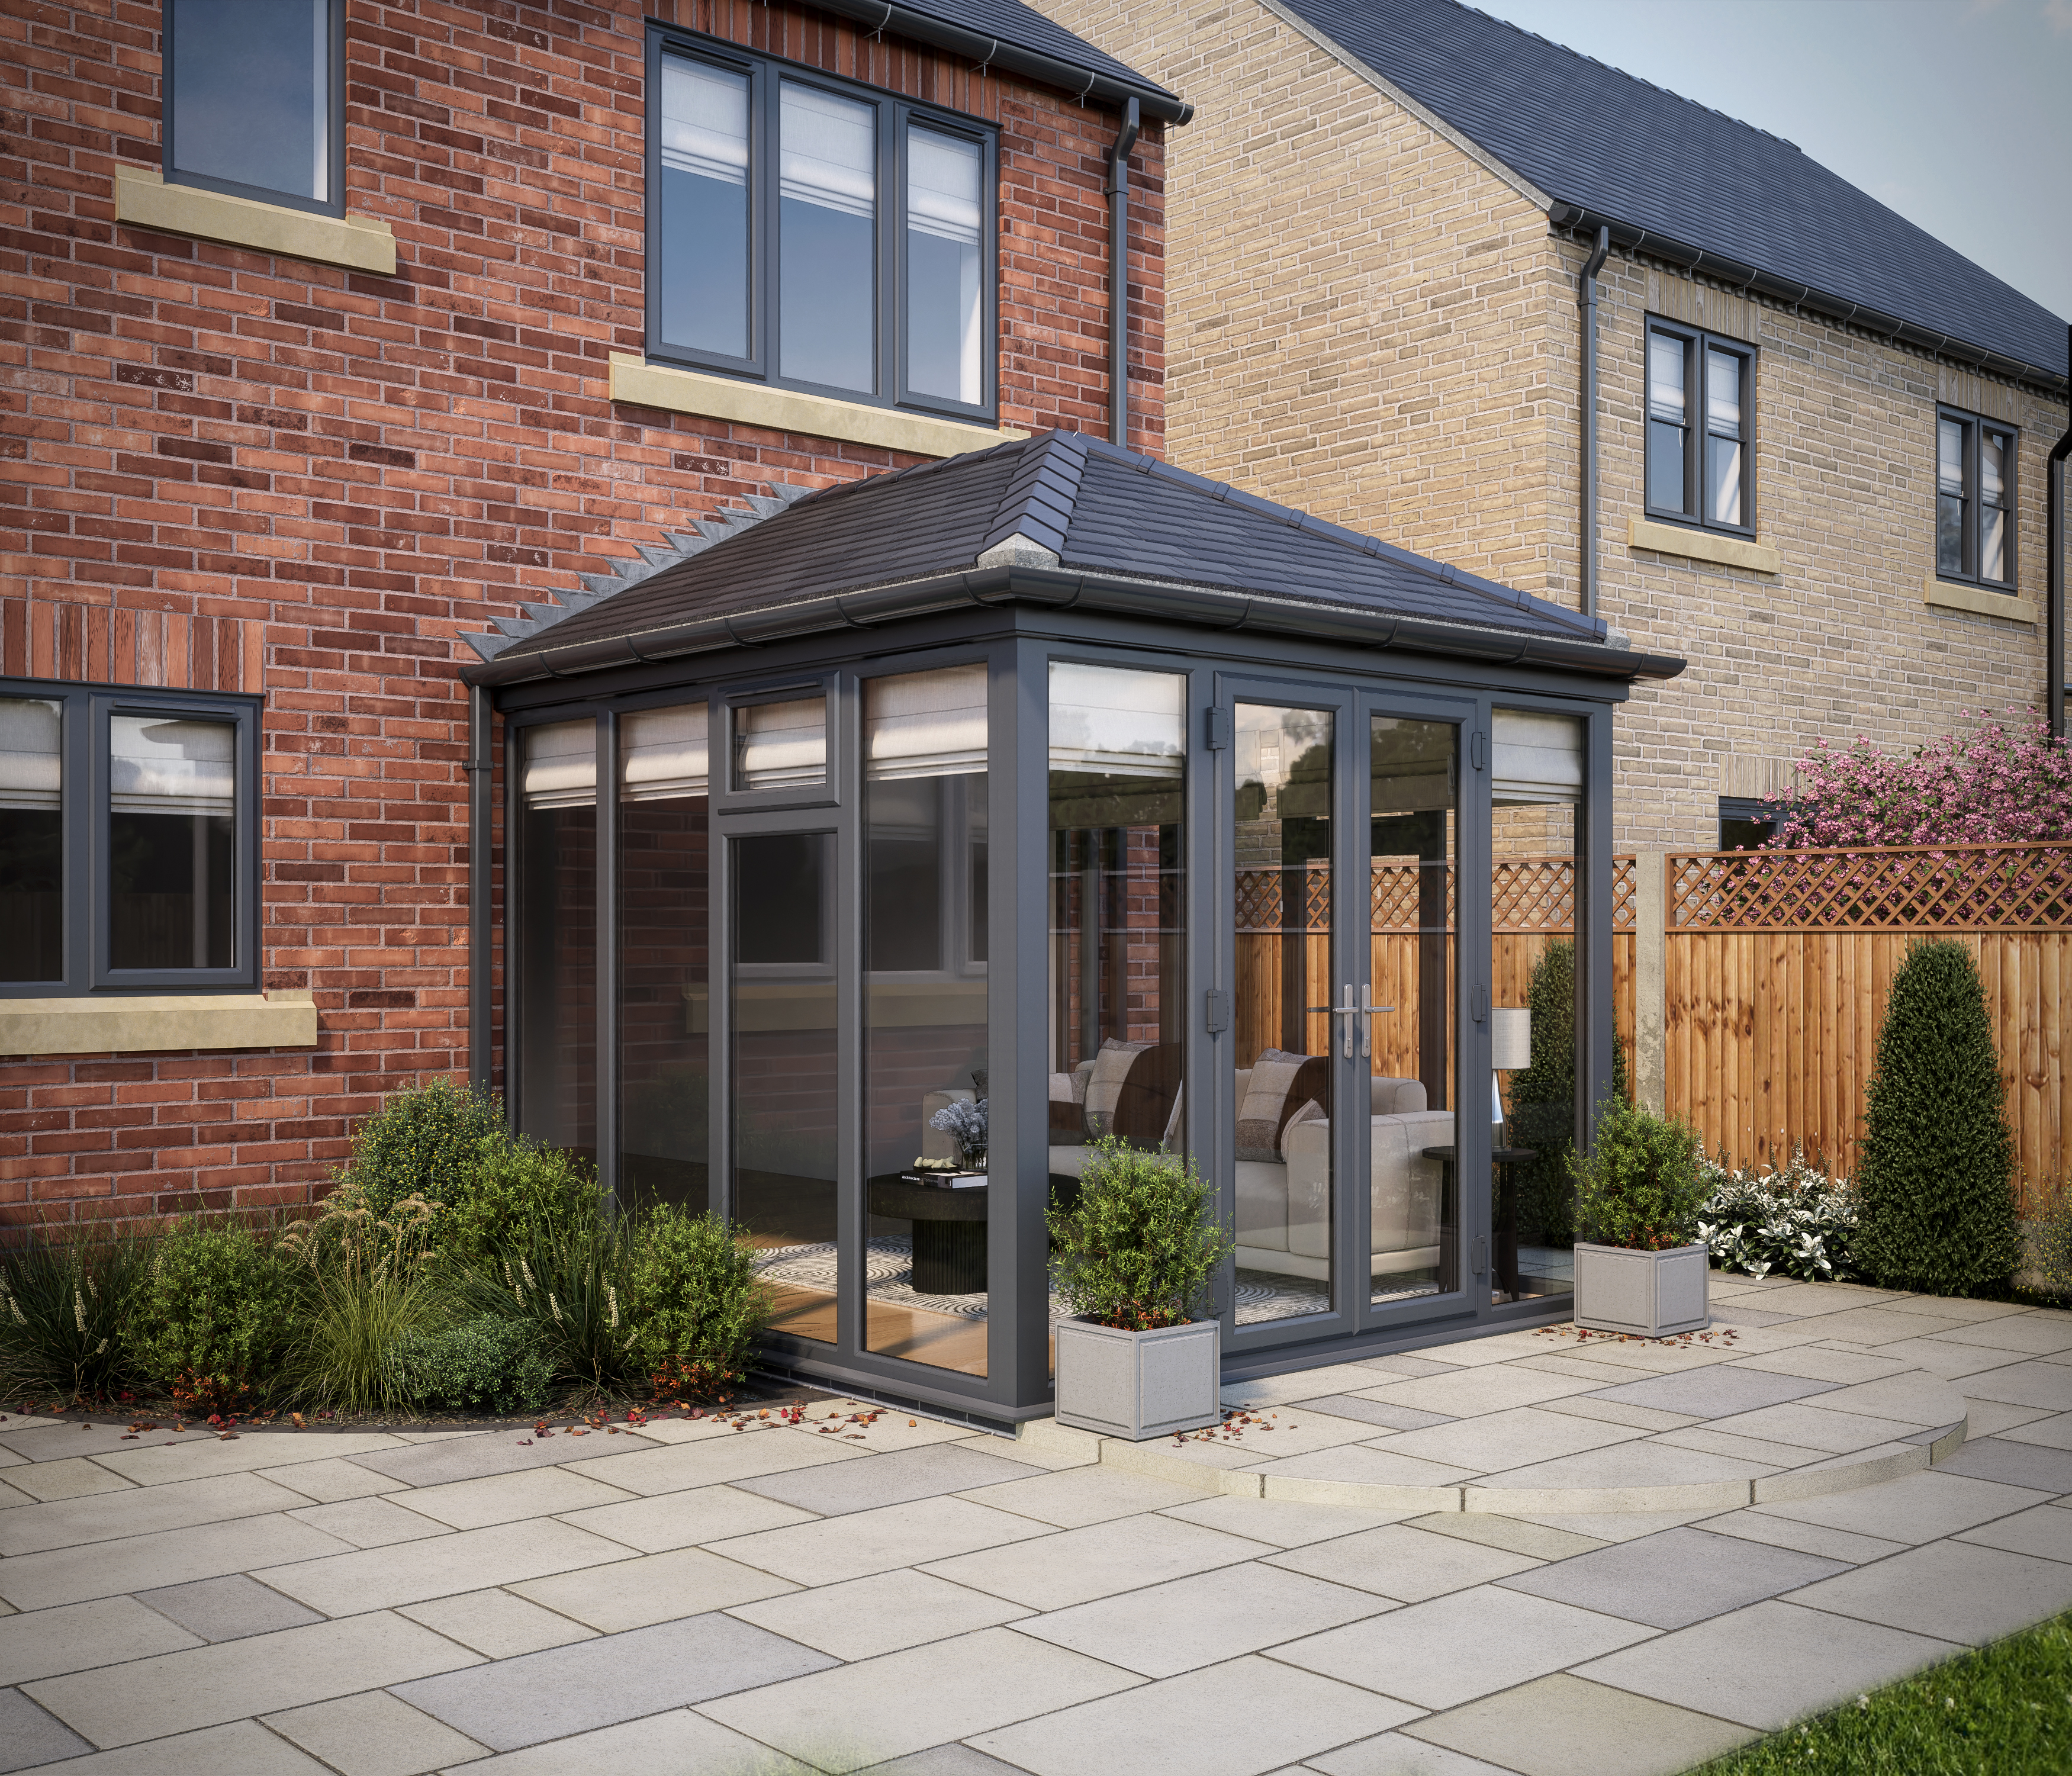 SOLid Roof Full Height Edwardian Conservatory Grey Frames with Titanium Grey Tiles - 10 x 10ft